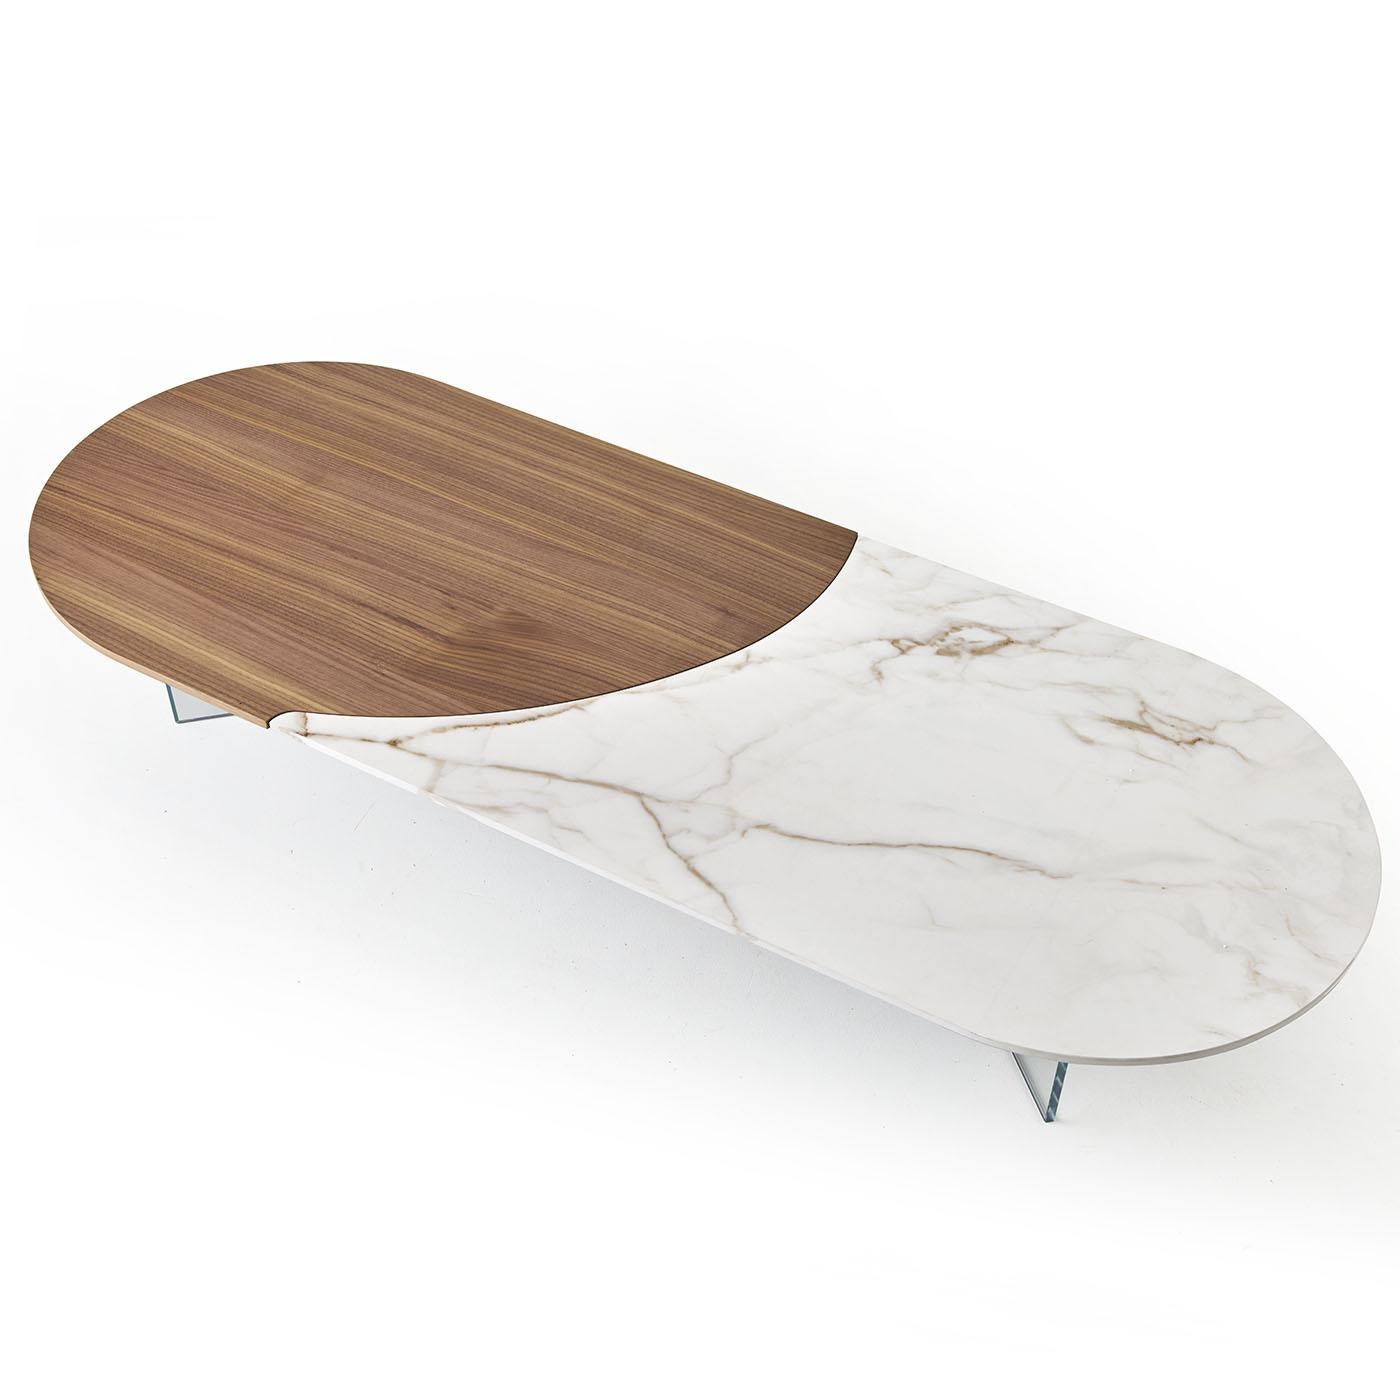 Bold, captivating, and daring. This coffee table captures the essence of less is more. The table's oval silhouette is comprised of 2 materials, solid Canaletto walnut and white Calacatta ceramic slab, arranged to seamlessly fit along an undulating